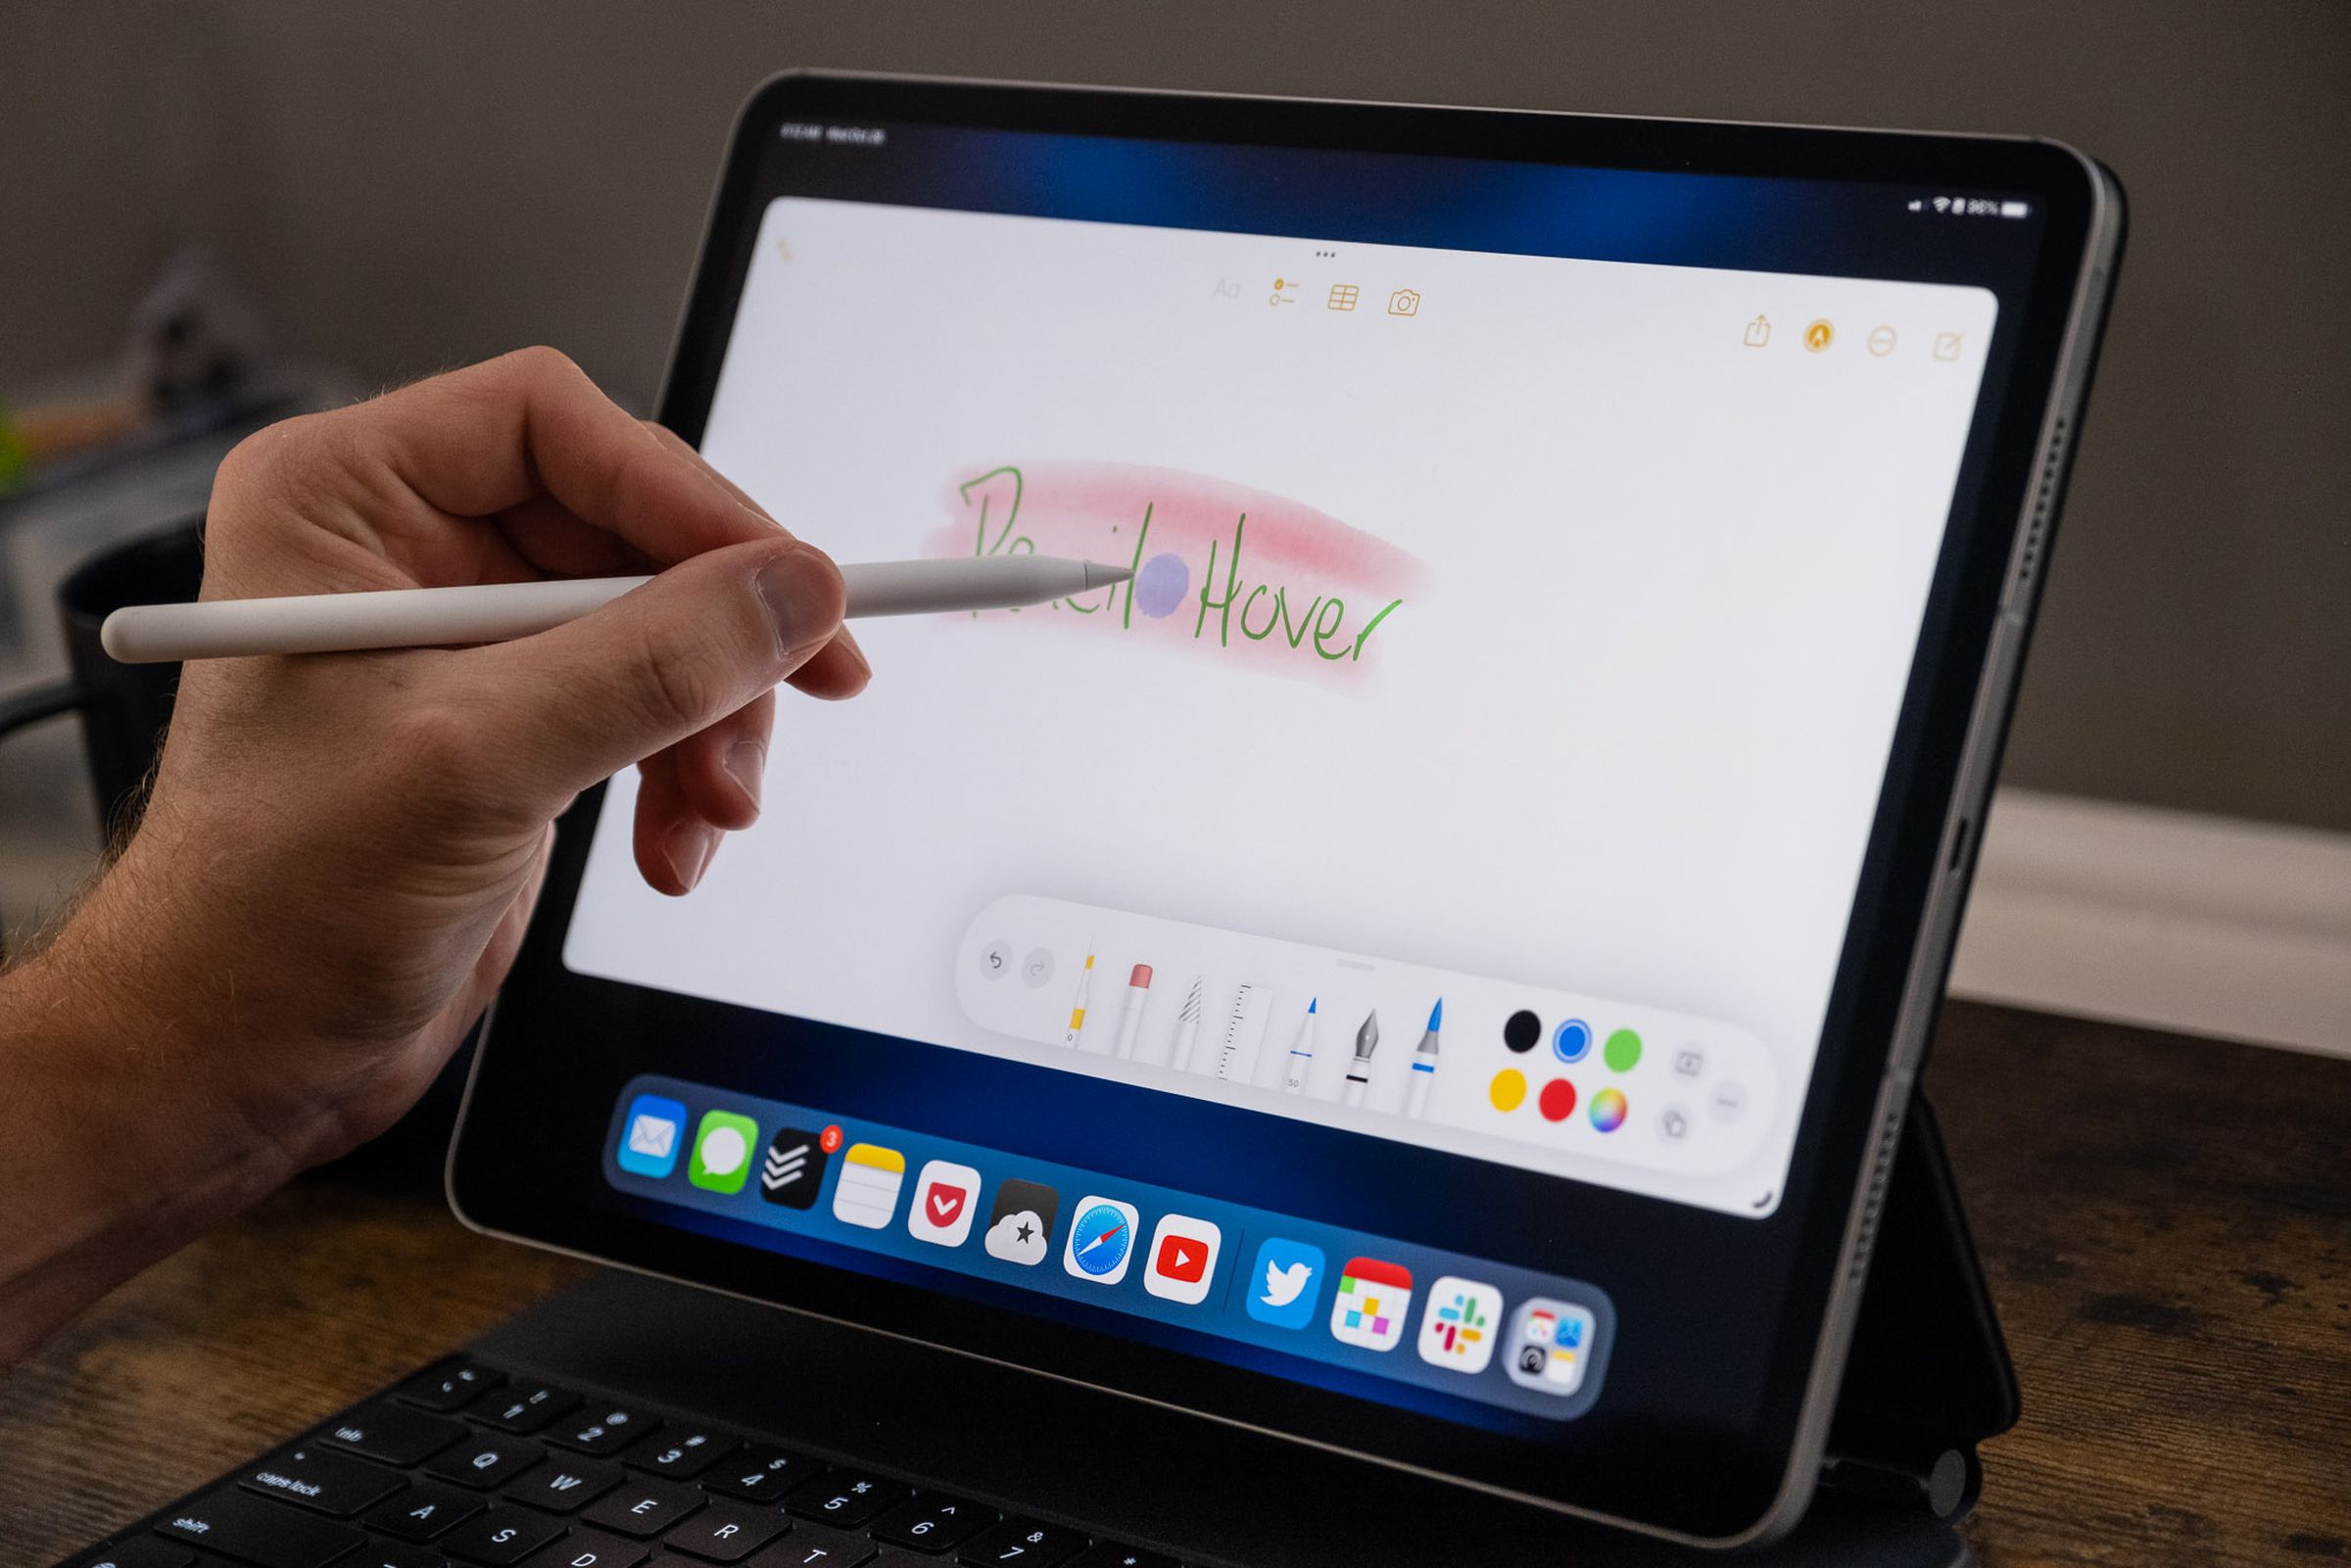 A demonstration of the Hover feature of the Apple Pencil on the new iPad Pro, showing the cursor that displays when the Pencil is held within 12mm of the screen.